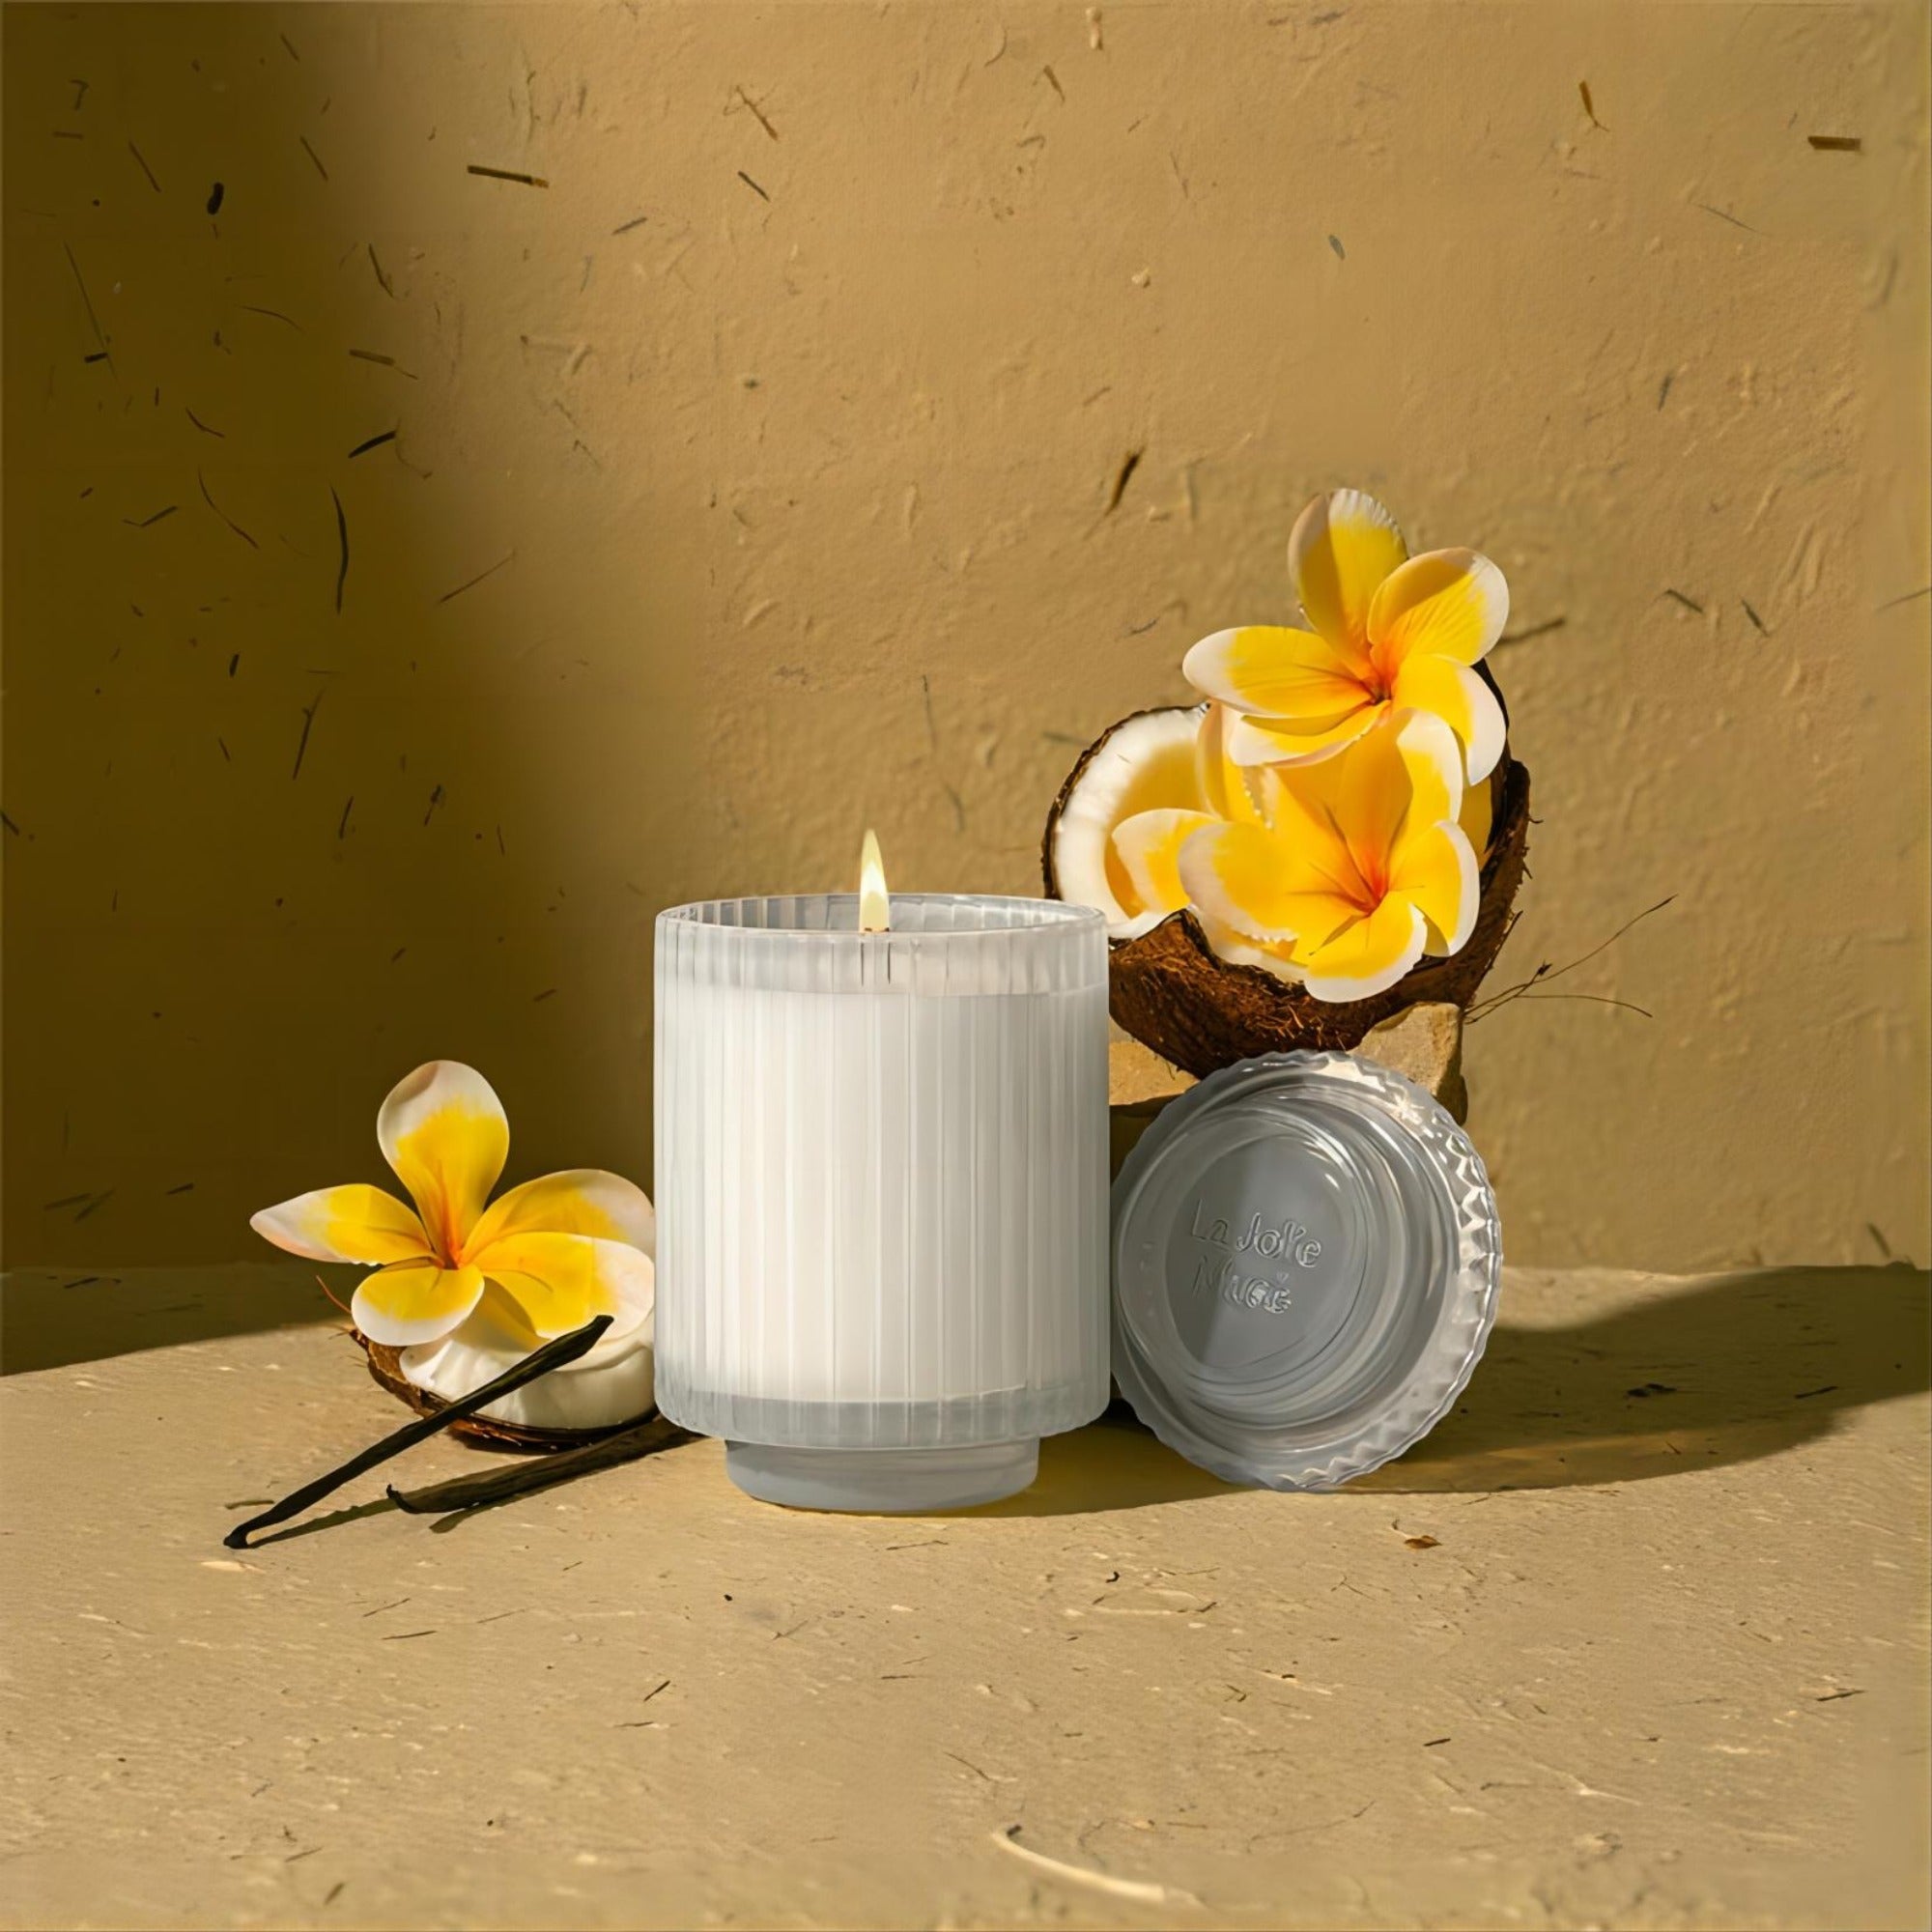 Editorial Shot of Amélie - Vanilla Coconut lit at the center of the scene surrounded by coconut shells and flowers.